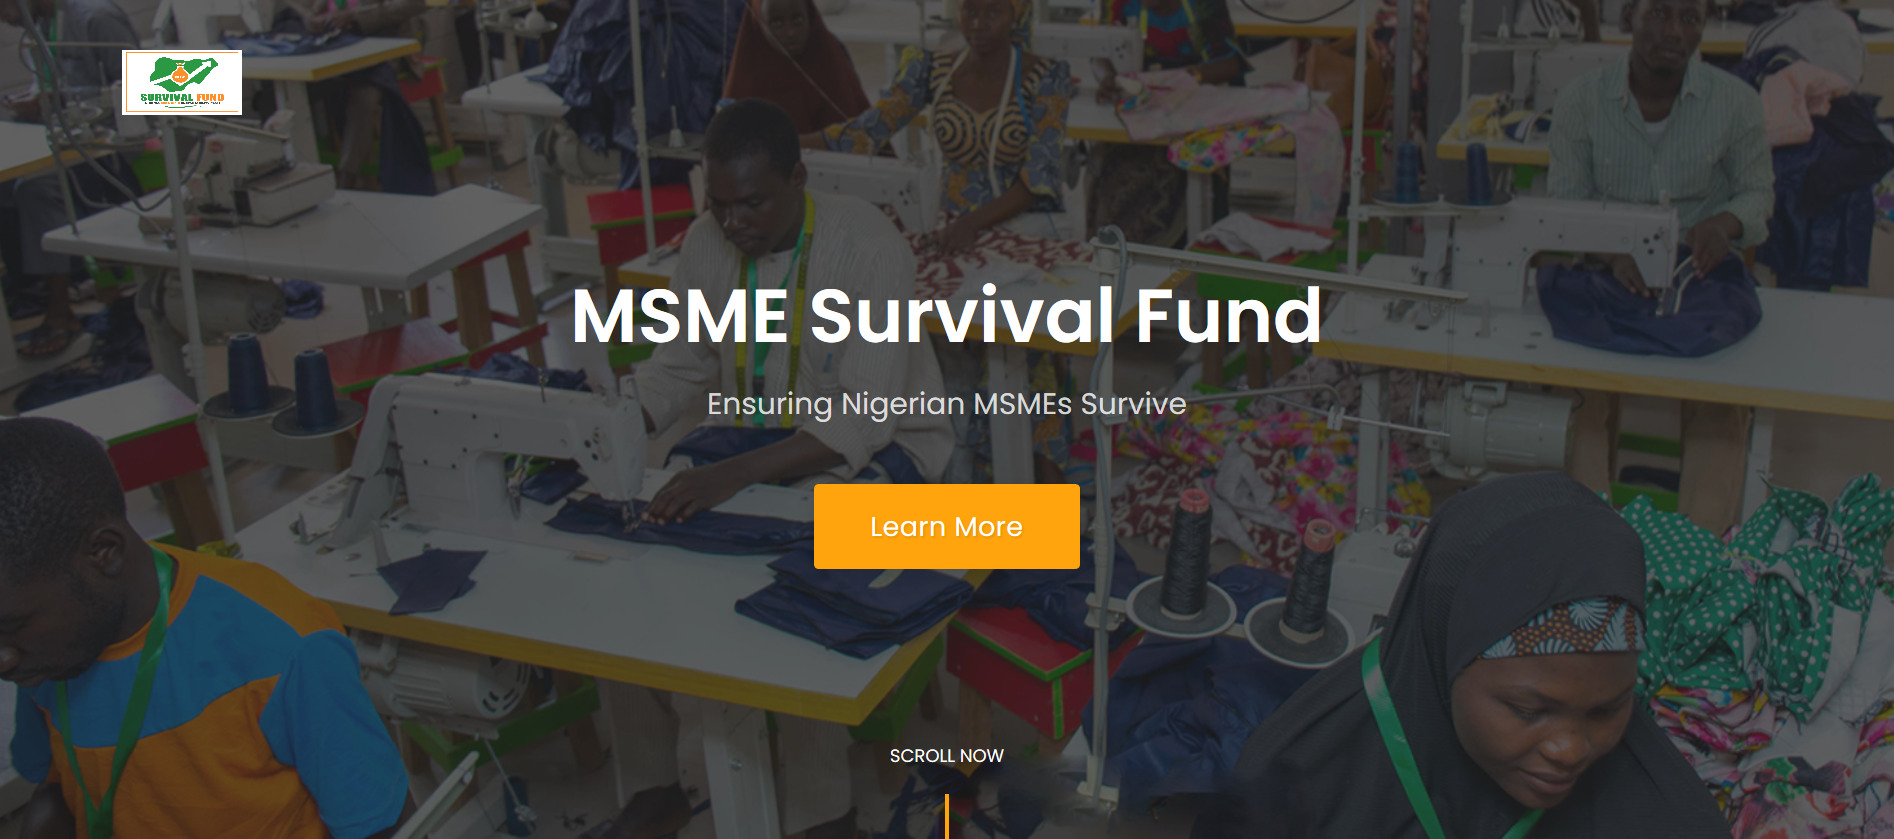 How to Apply for Covid 19 Nigerian Government 75Billion Naira MSME Survival Fund for Self Employed, Transporters, Artisans across Nigeria.